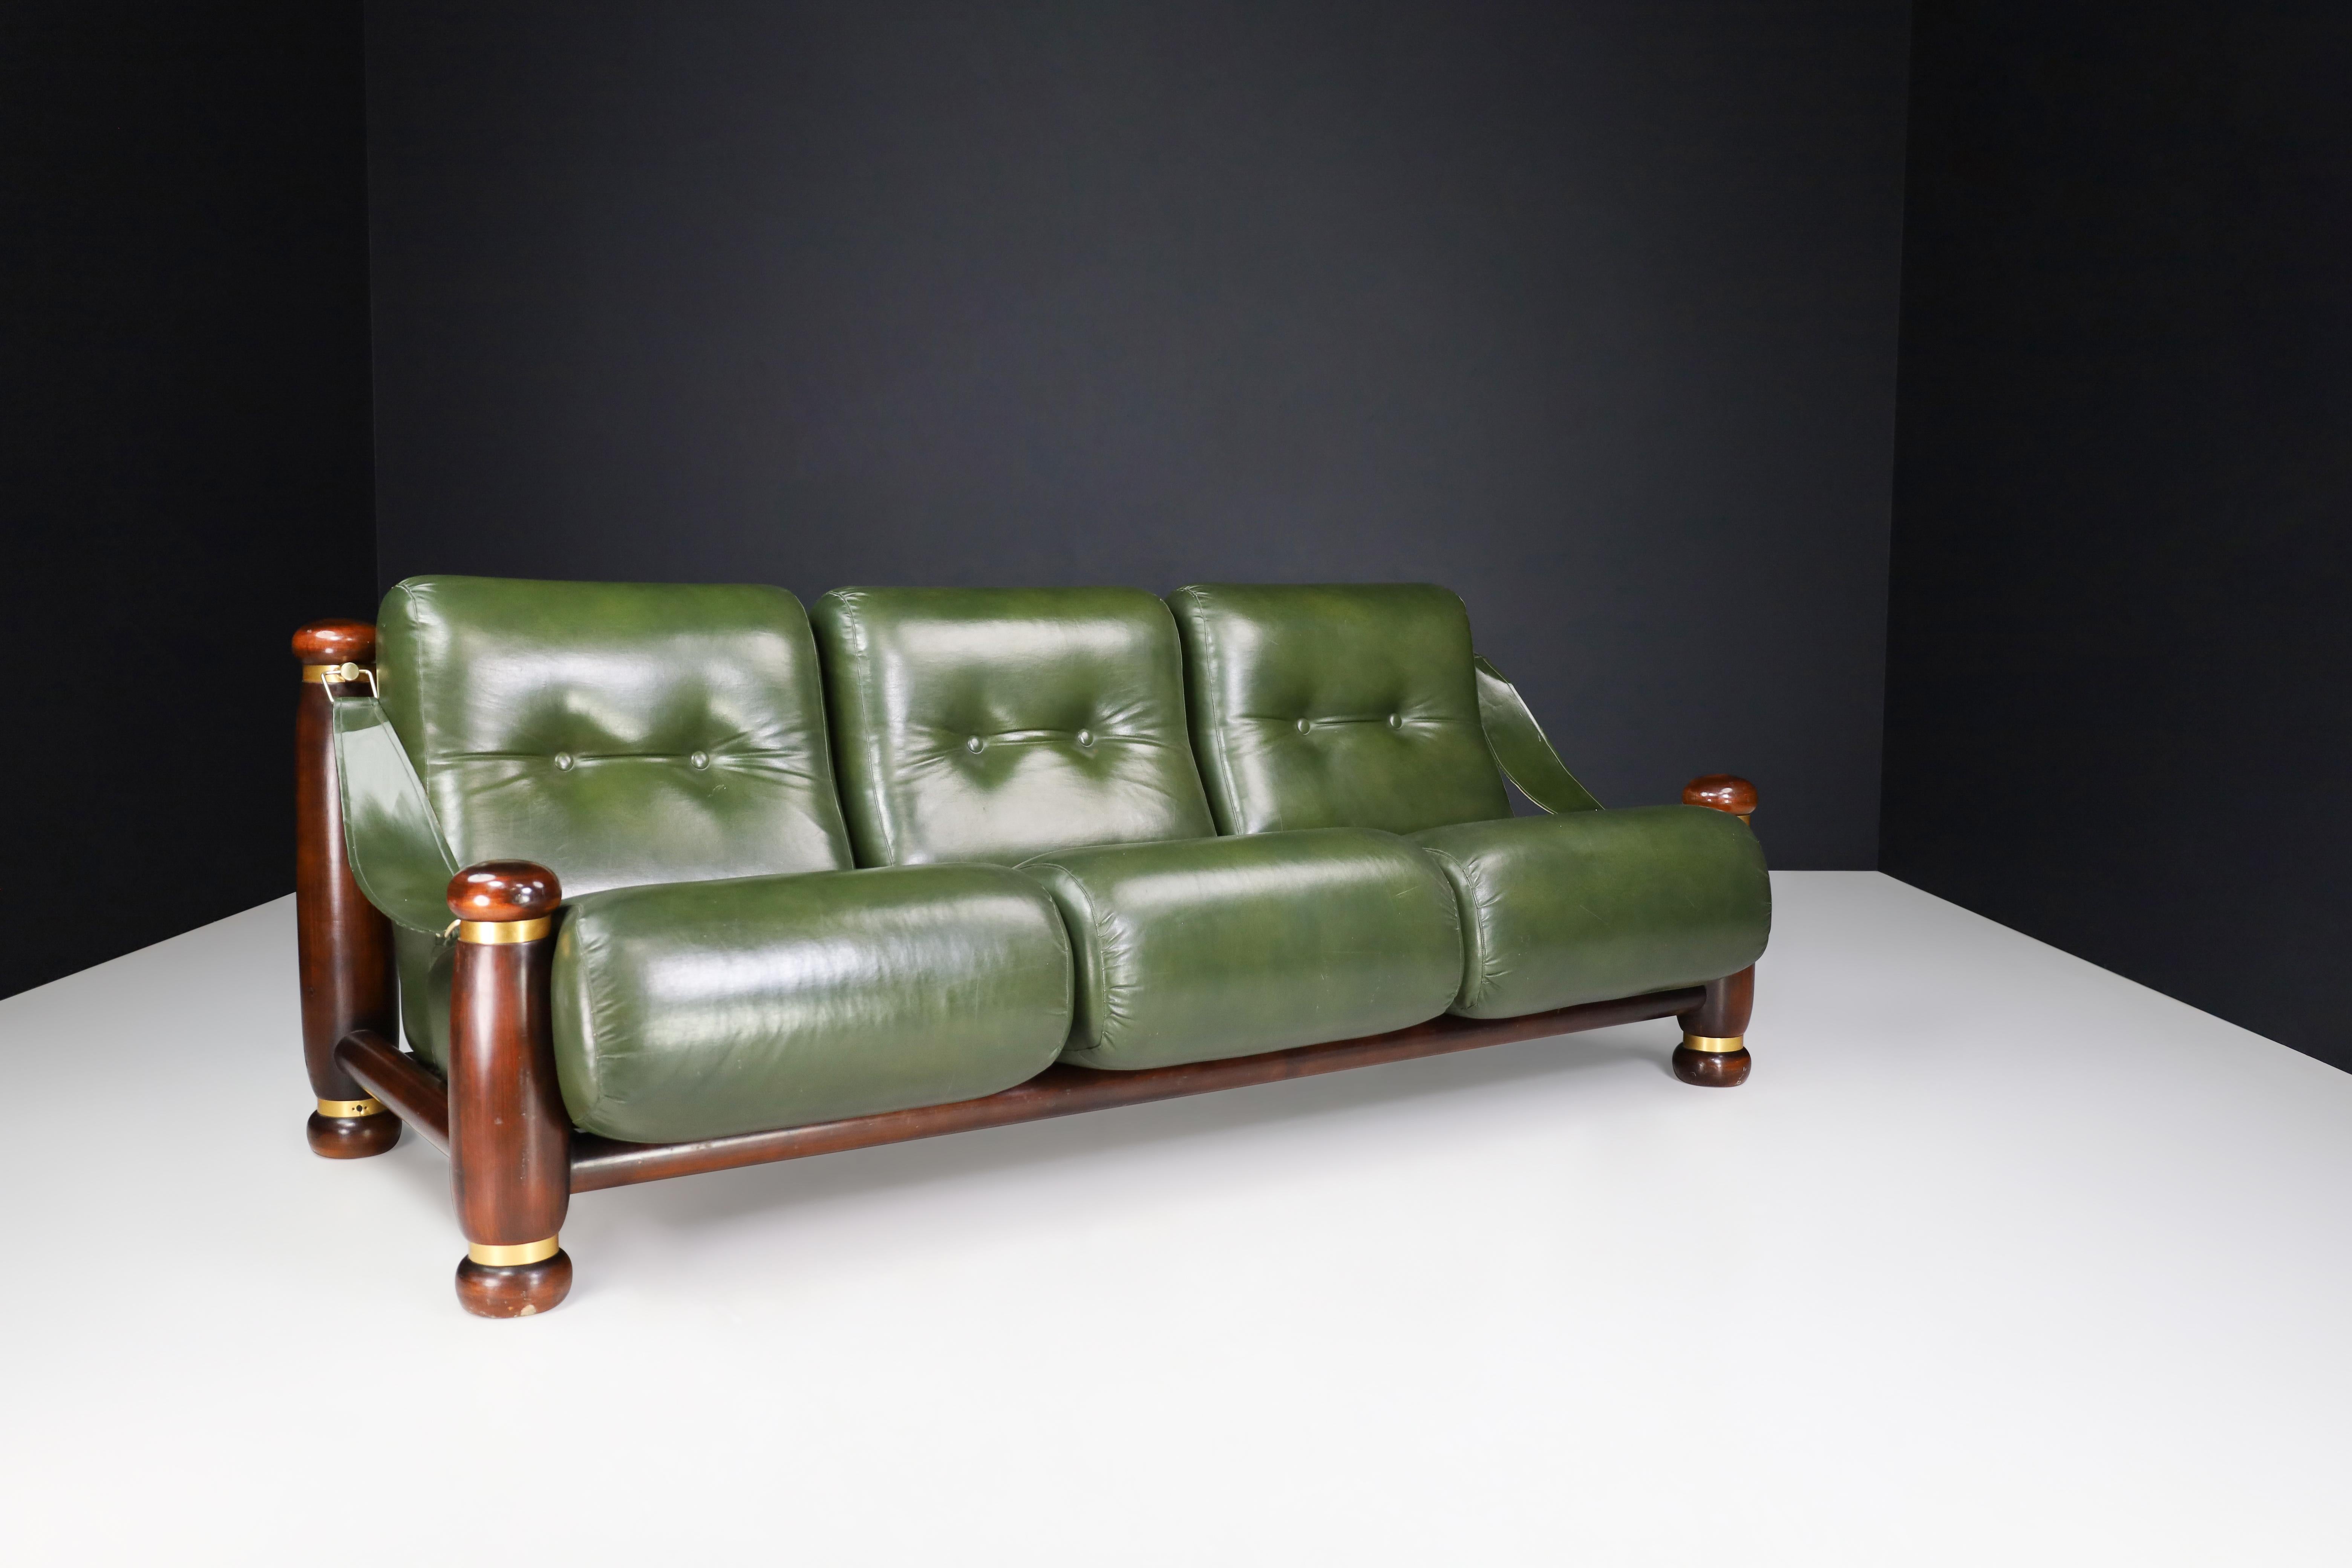 Walnut, Brass, And Green leather Three-seat sofa from Italy 1960s

This bulky lounge three-seat sofa, made in Italy during the 1960s, features a stylish design that combines walnut, brass, and leather elements. This large sofa would make a